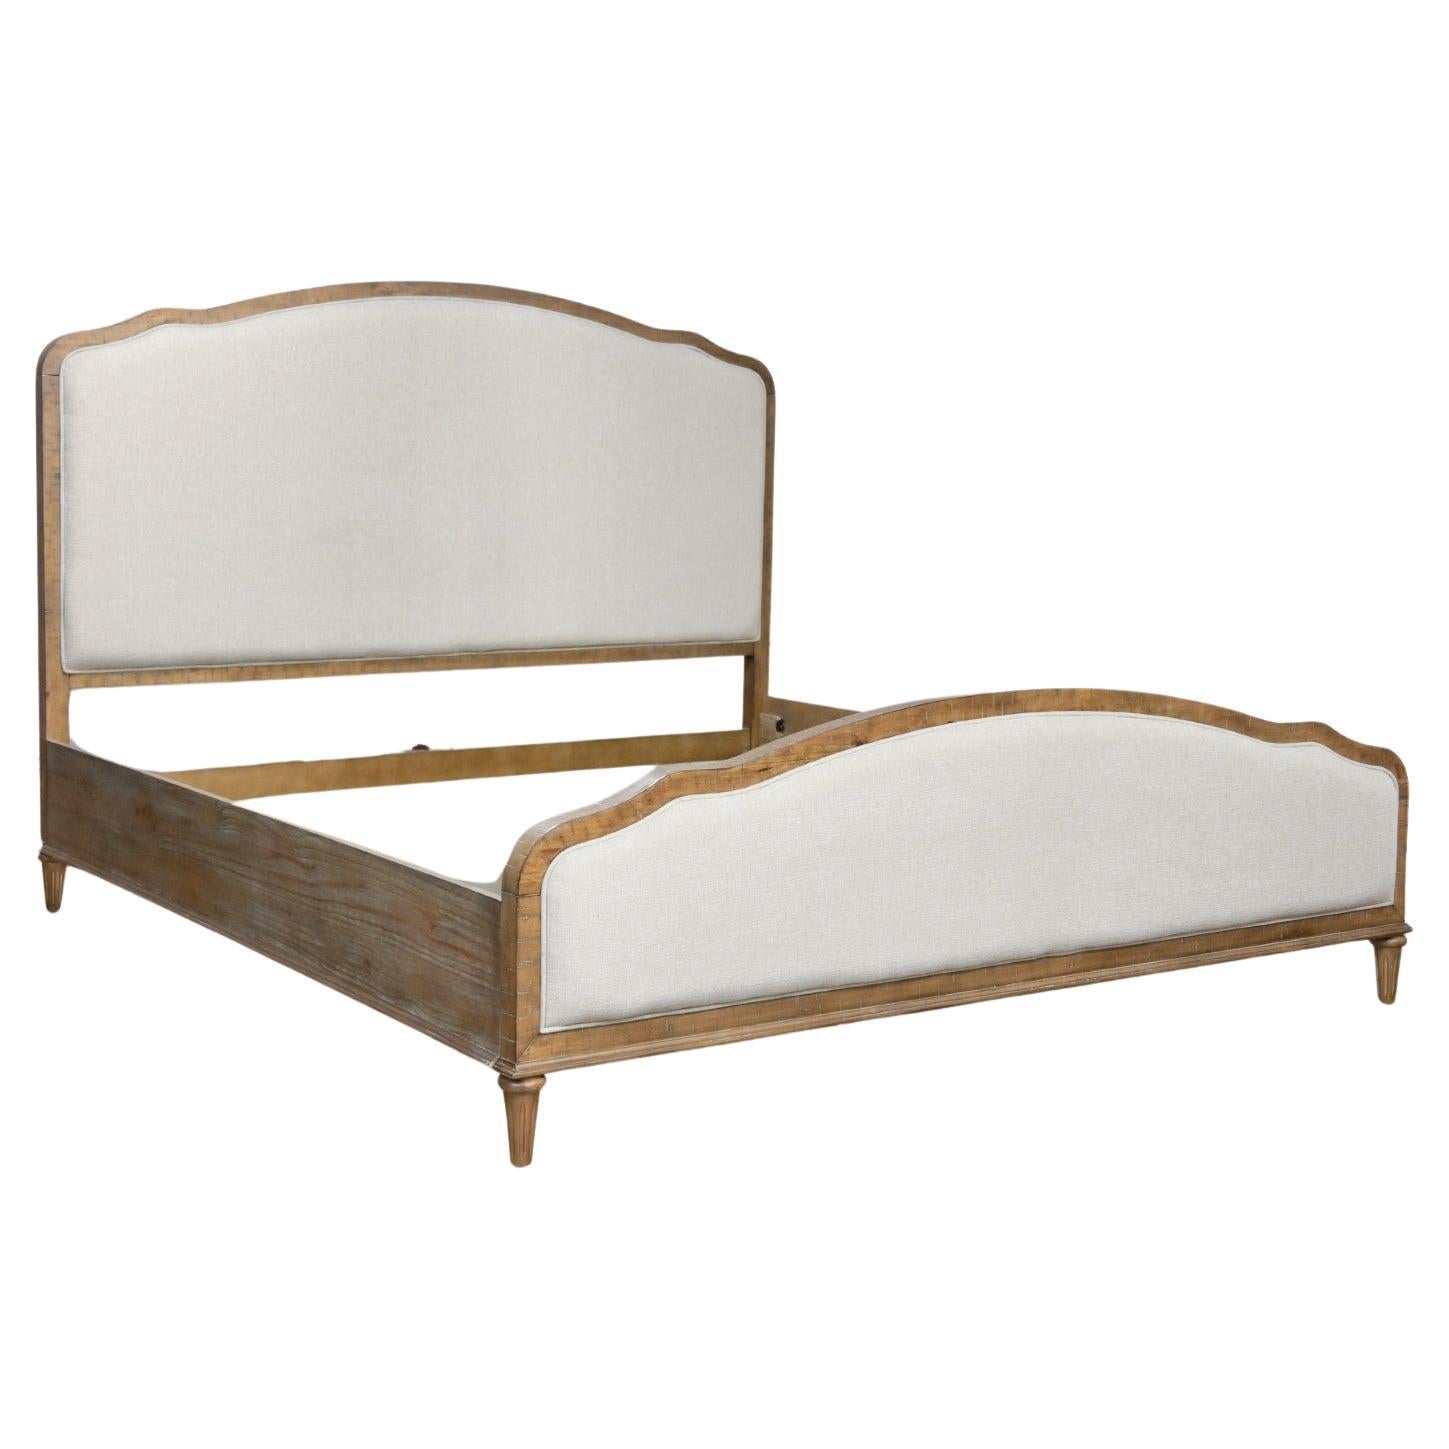 Early 21st Century French Country Rustic Mahogany & Upholstered King Size Bed